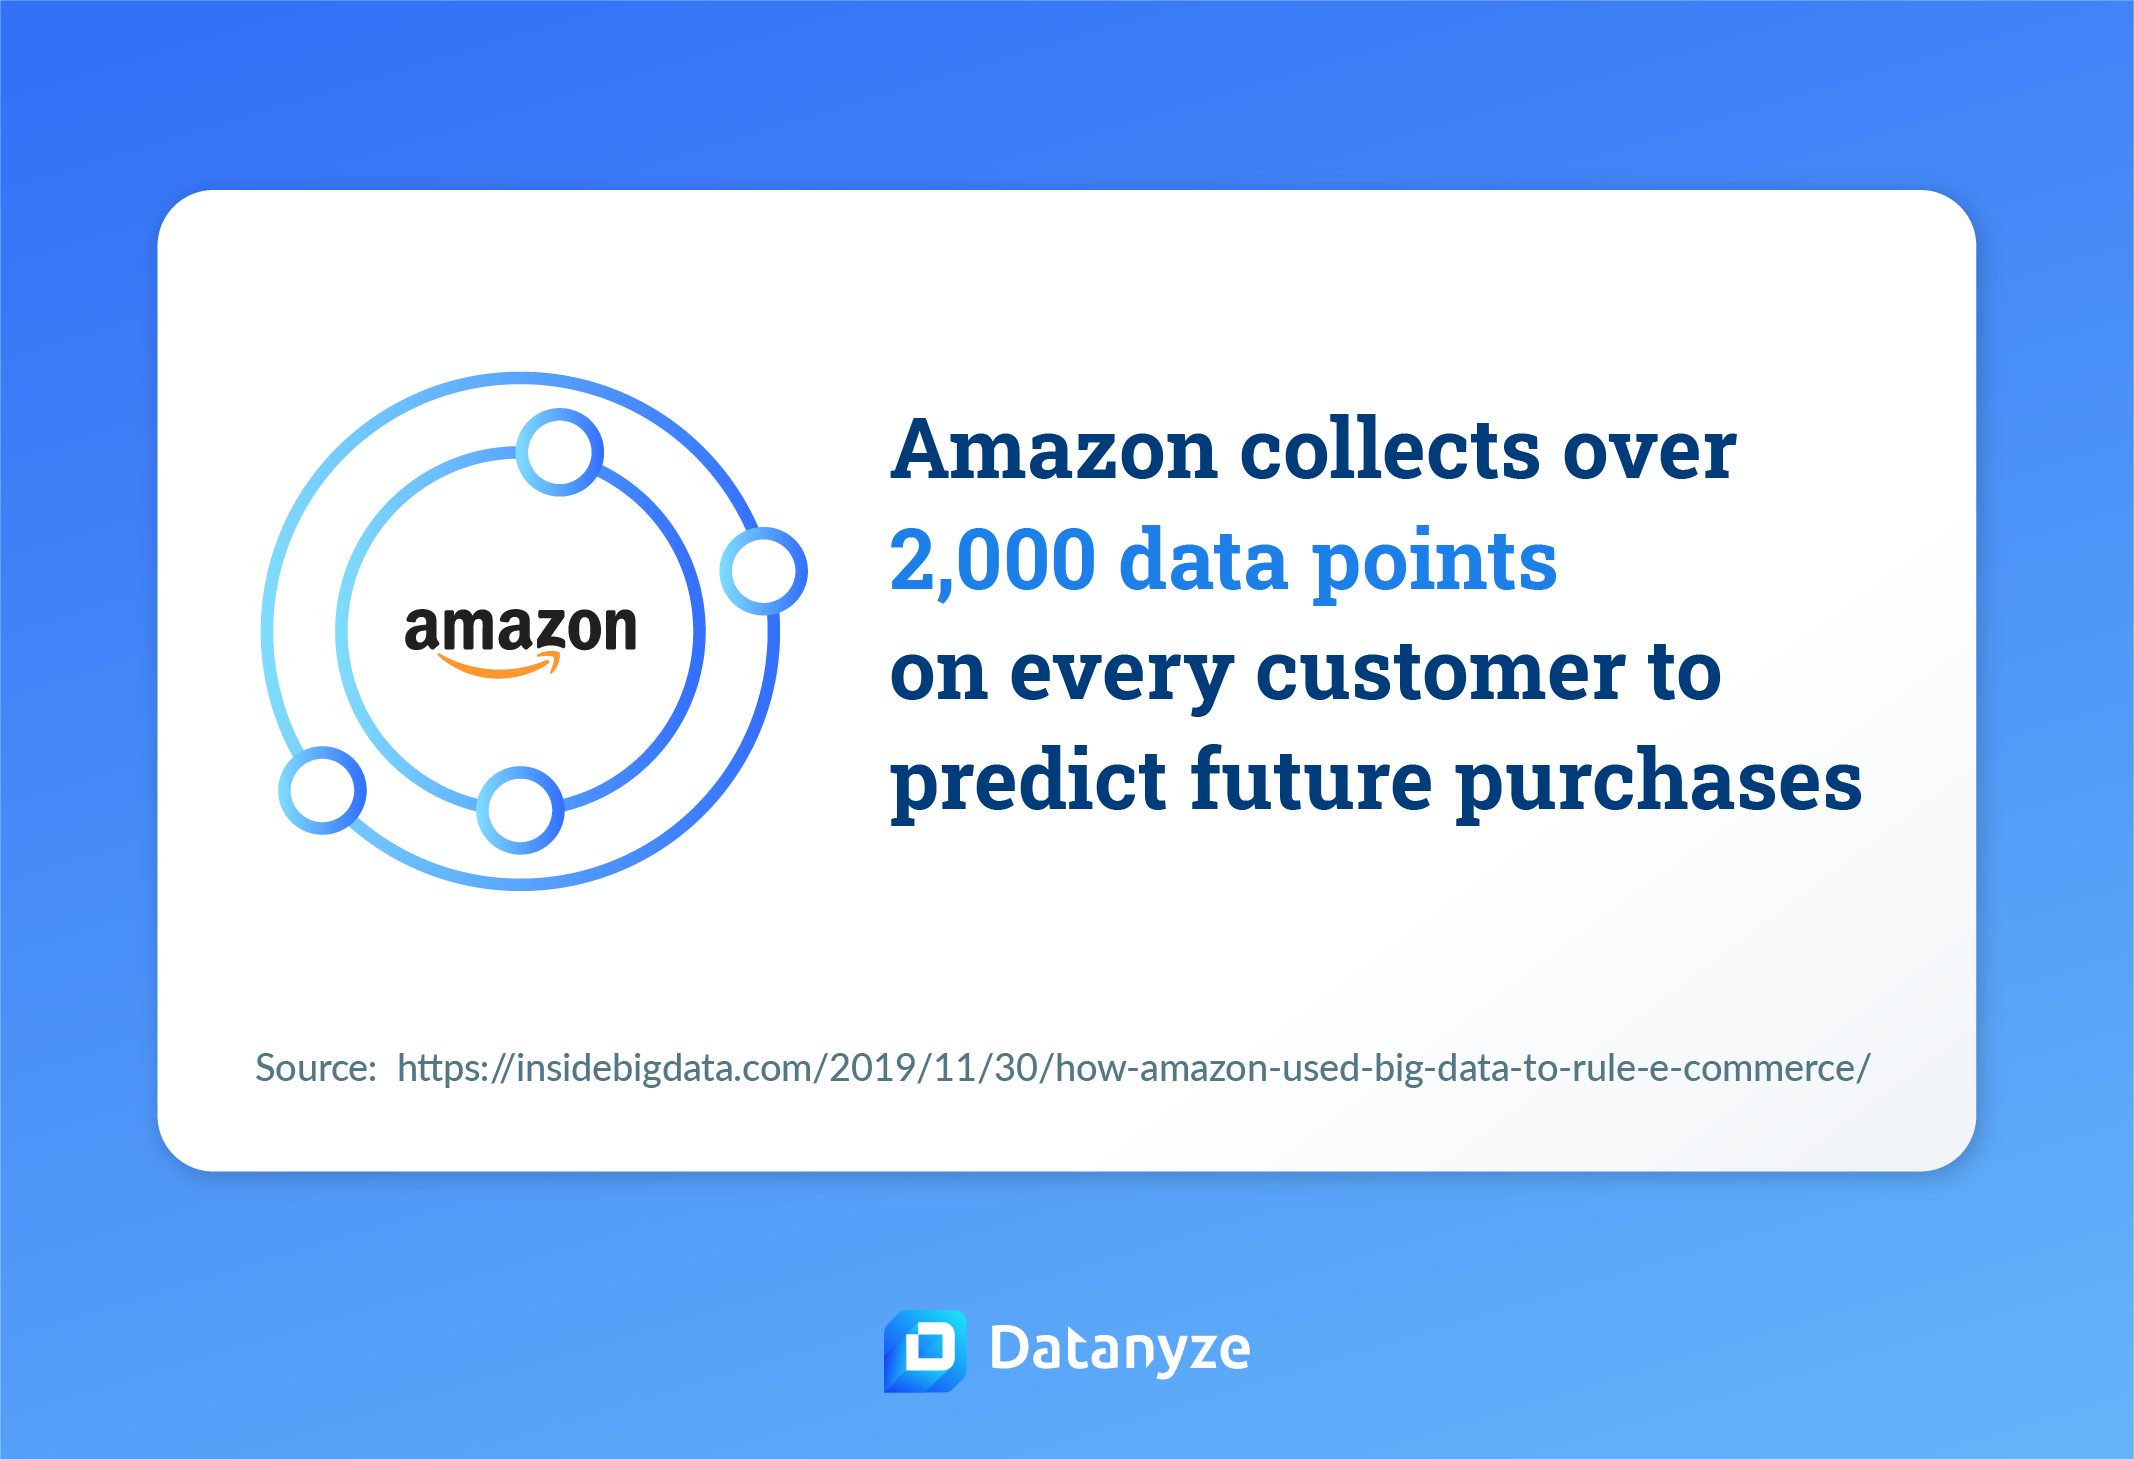 amazon data point for future puchases